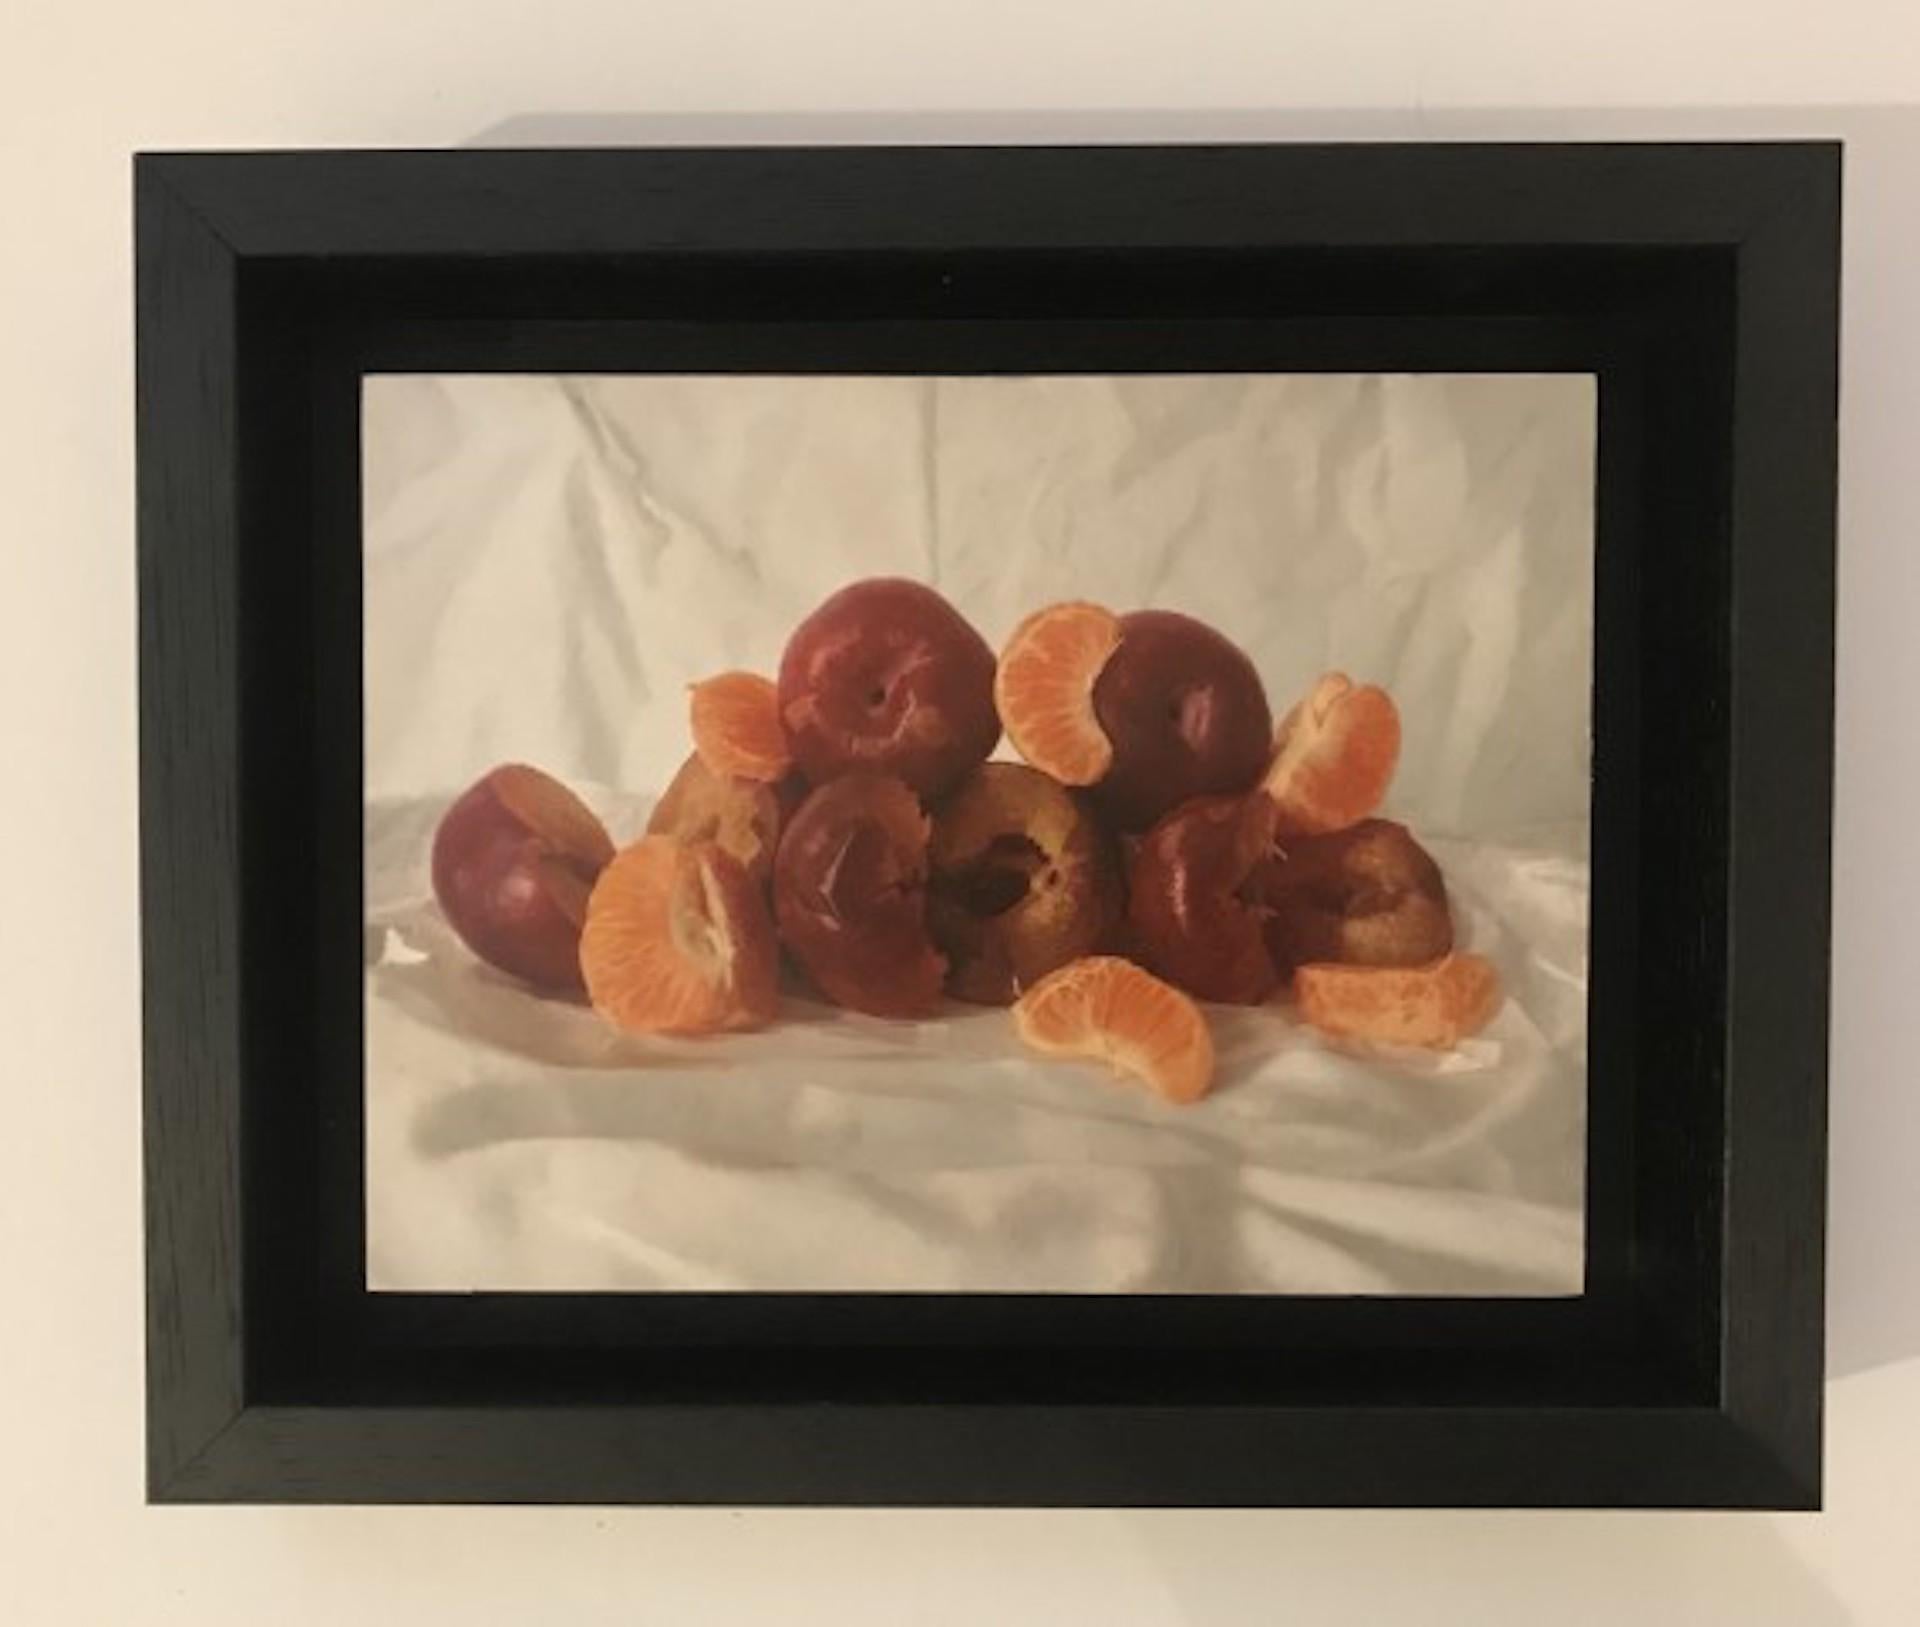 Kate Verrion, Cherries and Satsuma, Realist Still Life Fruit Painting 1